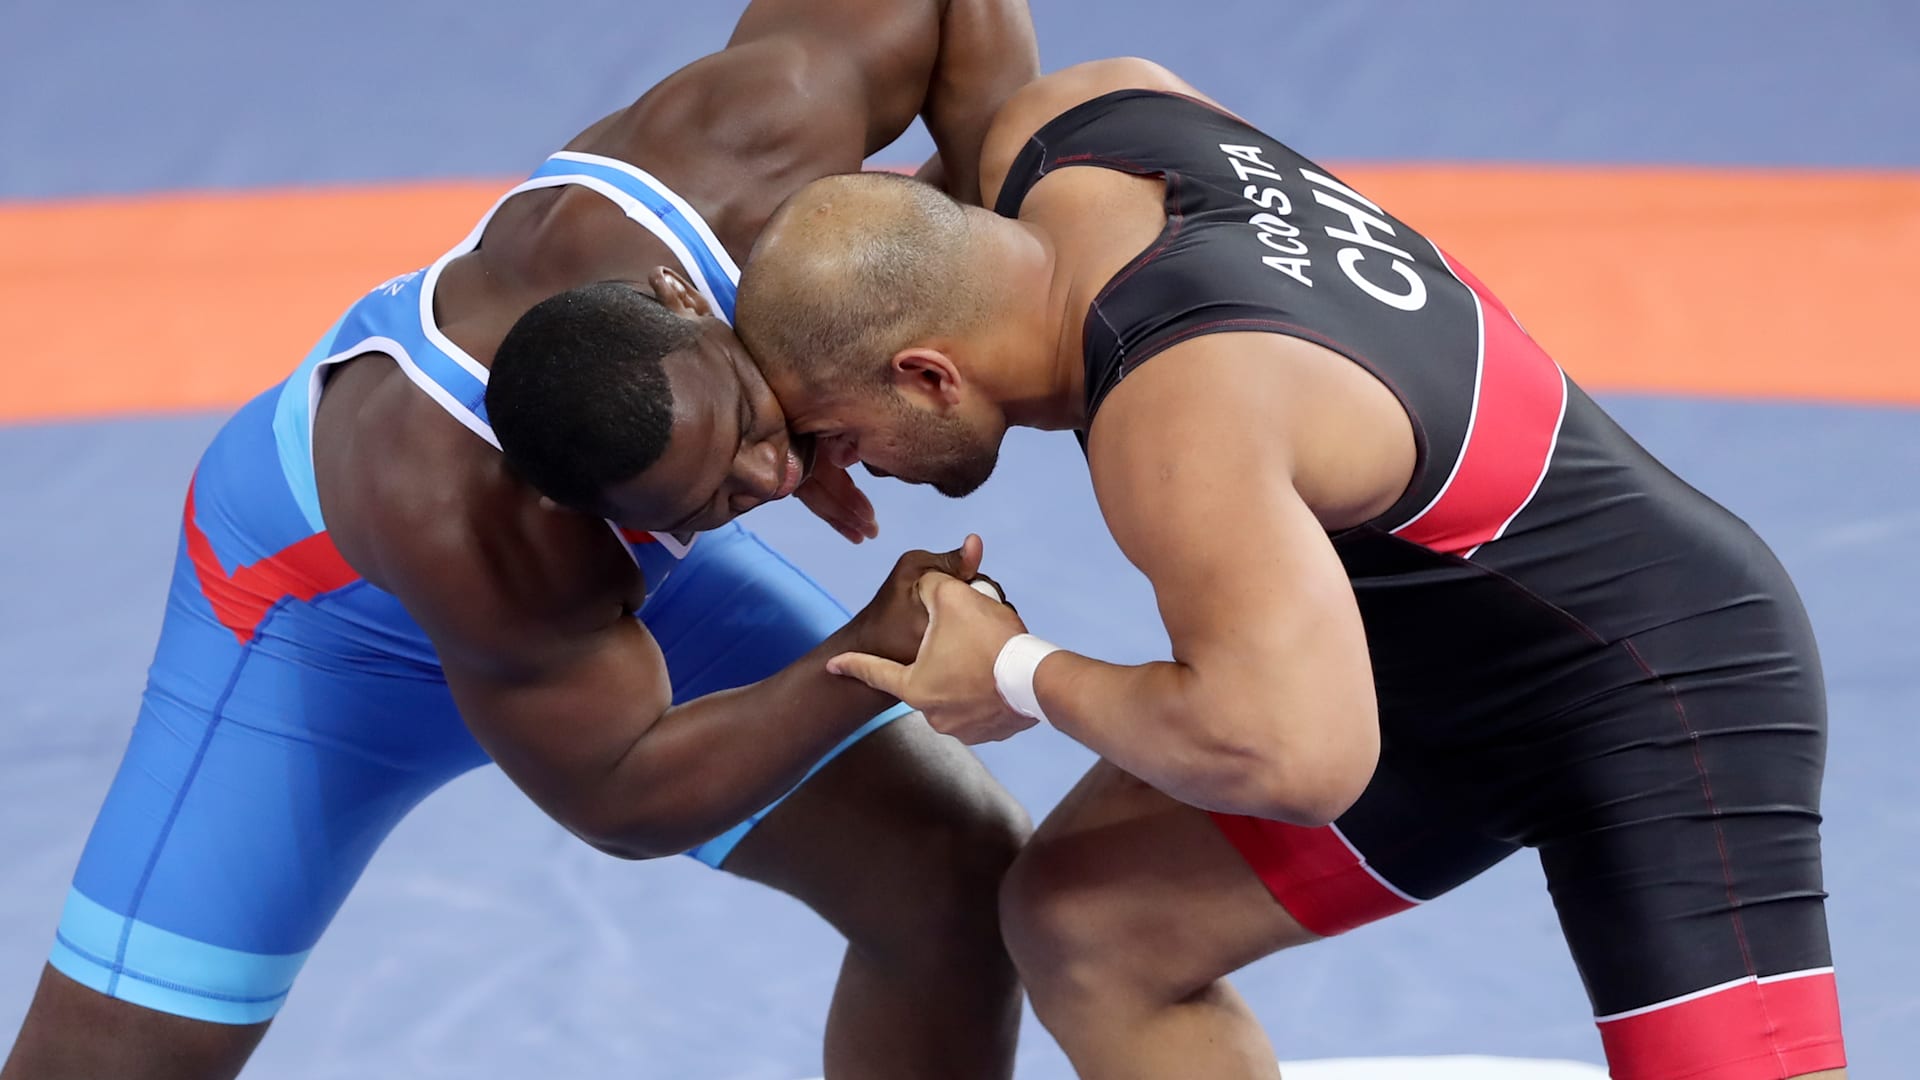 Olympic wrestling at Tokyo 2020: Top five things to know